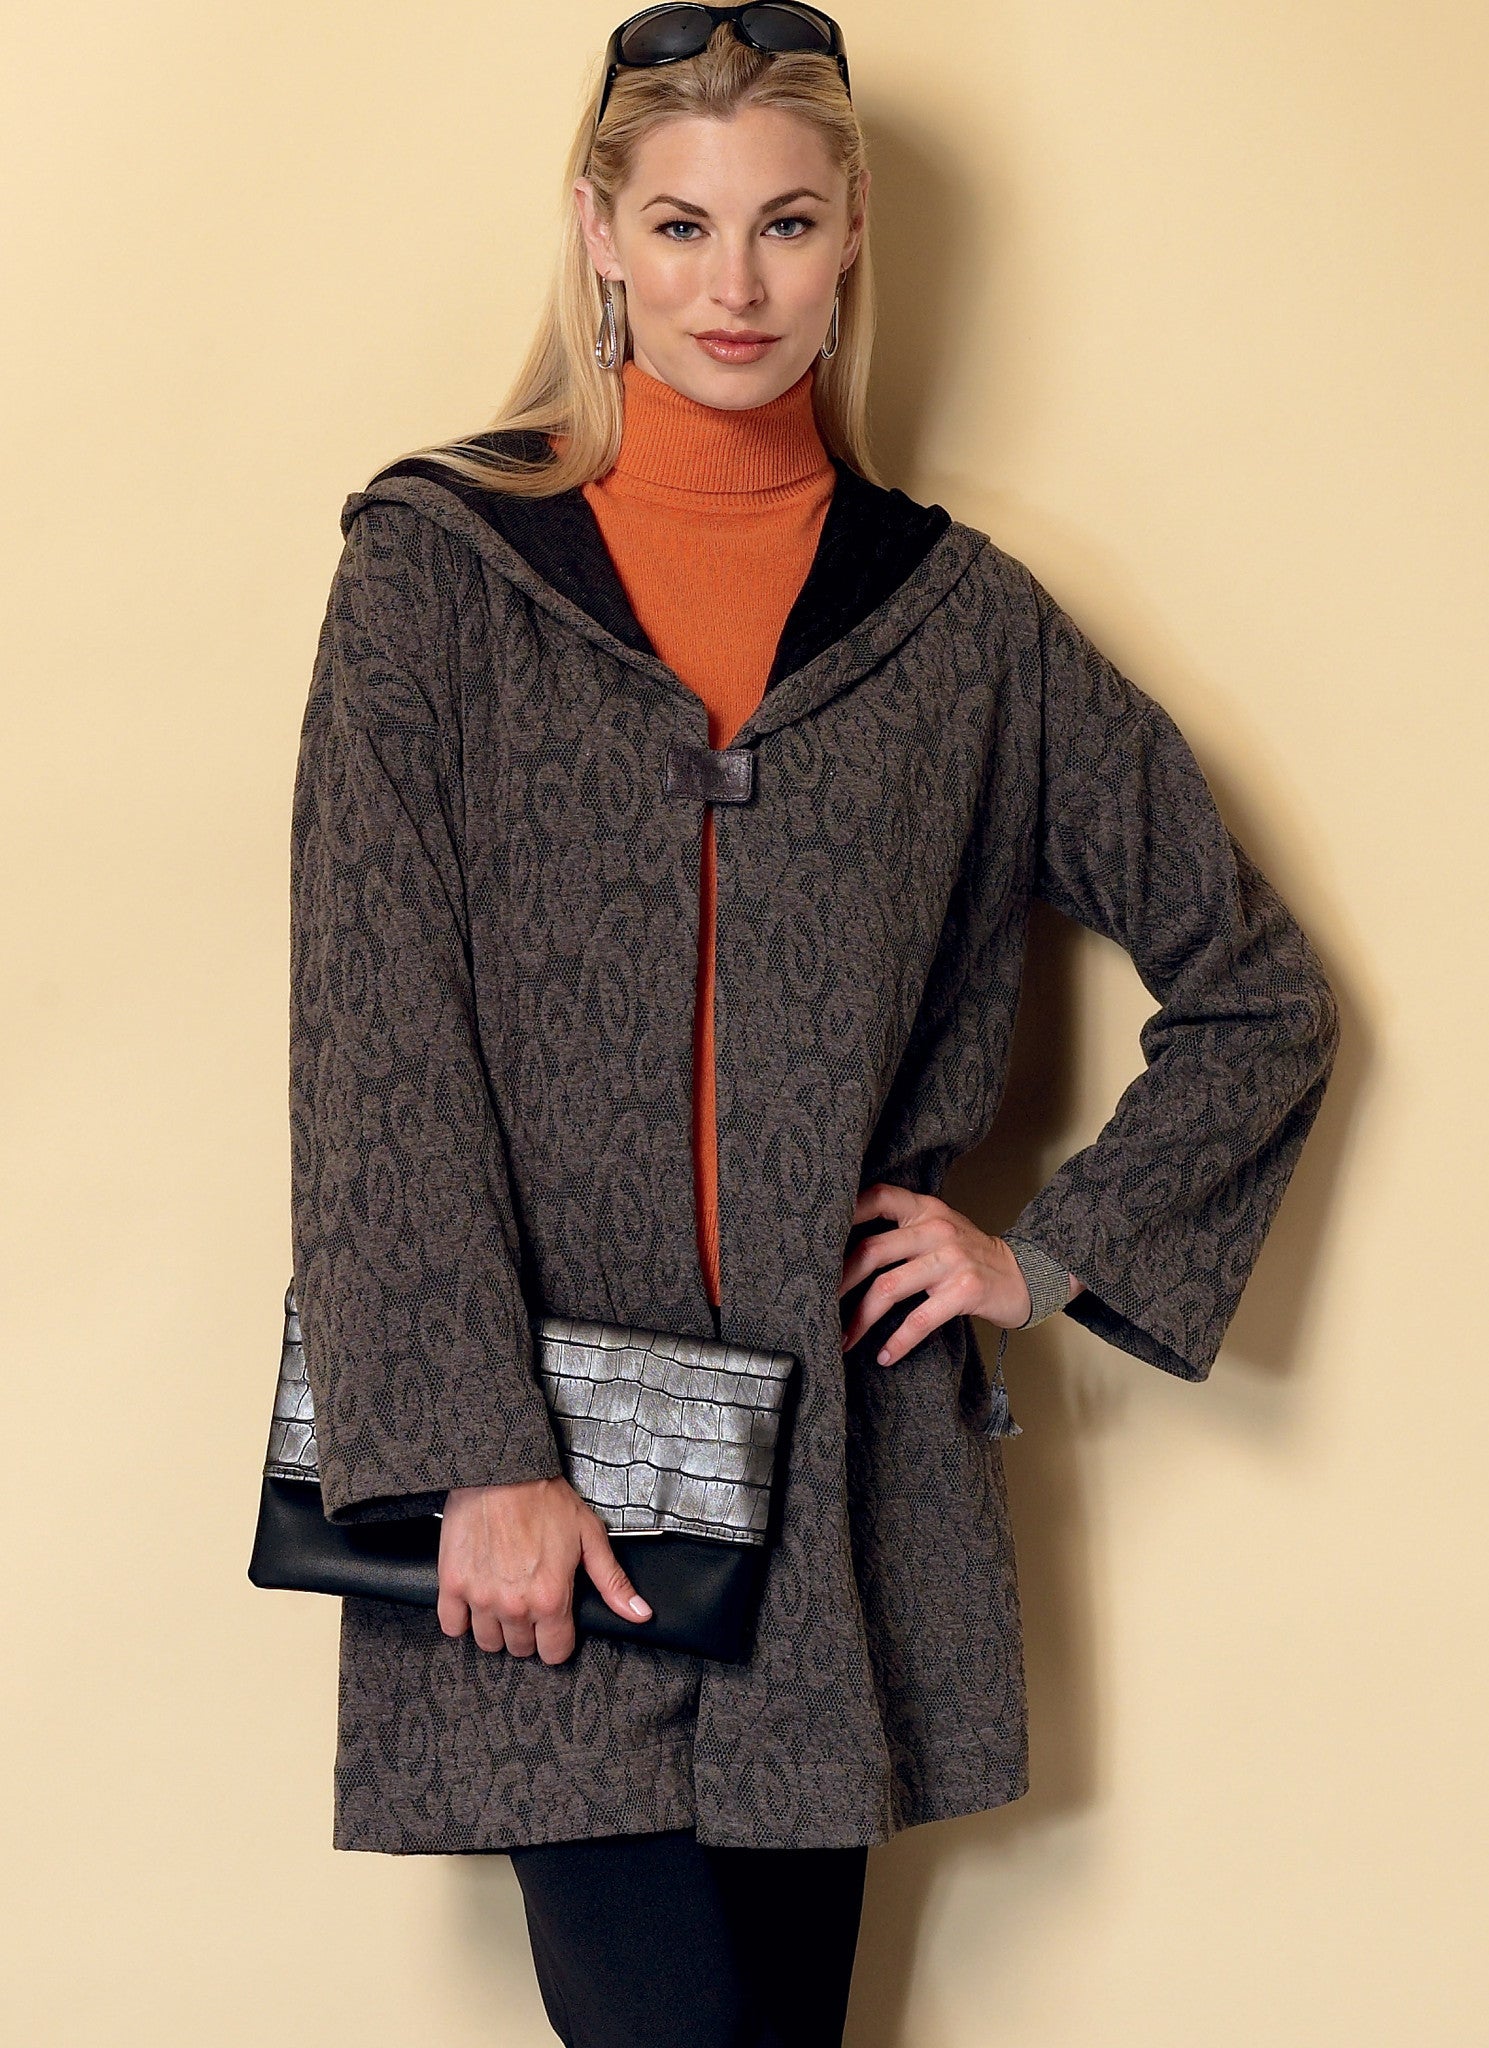 B6394 Misses' Shawl Collar Coats from Jaycotts Sewing Supplies